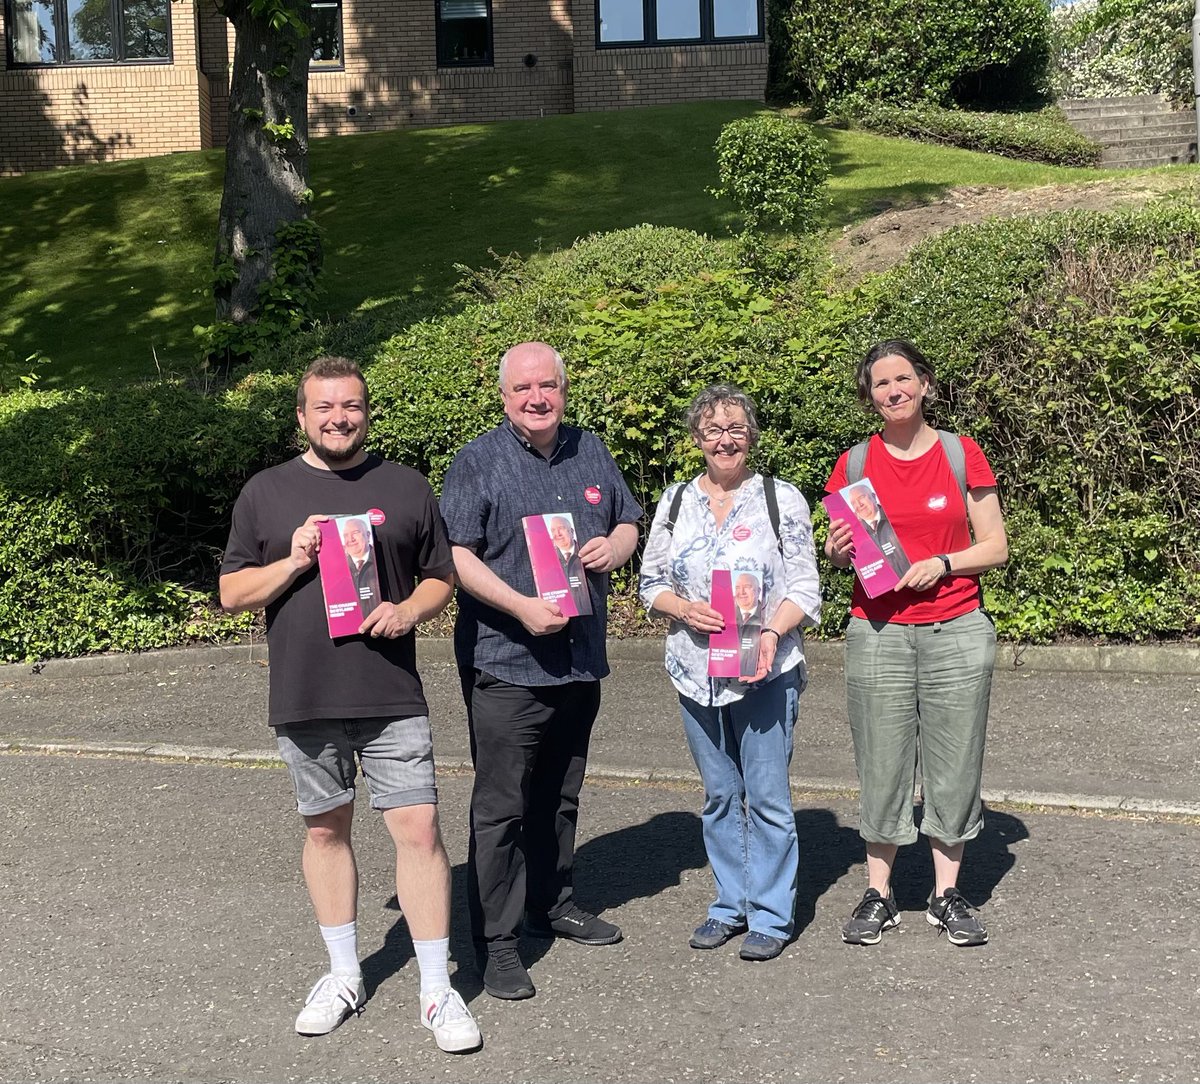 A very sunny day in Kelvindale and Cleveden with @GlasgowPam @JillBGlasgow and the @ScottishLabour team - many people telling us that they want change #voteScotLab24 #LabourDoorstep #GENow